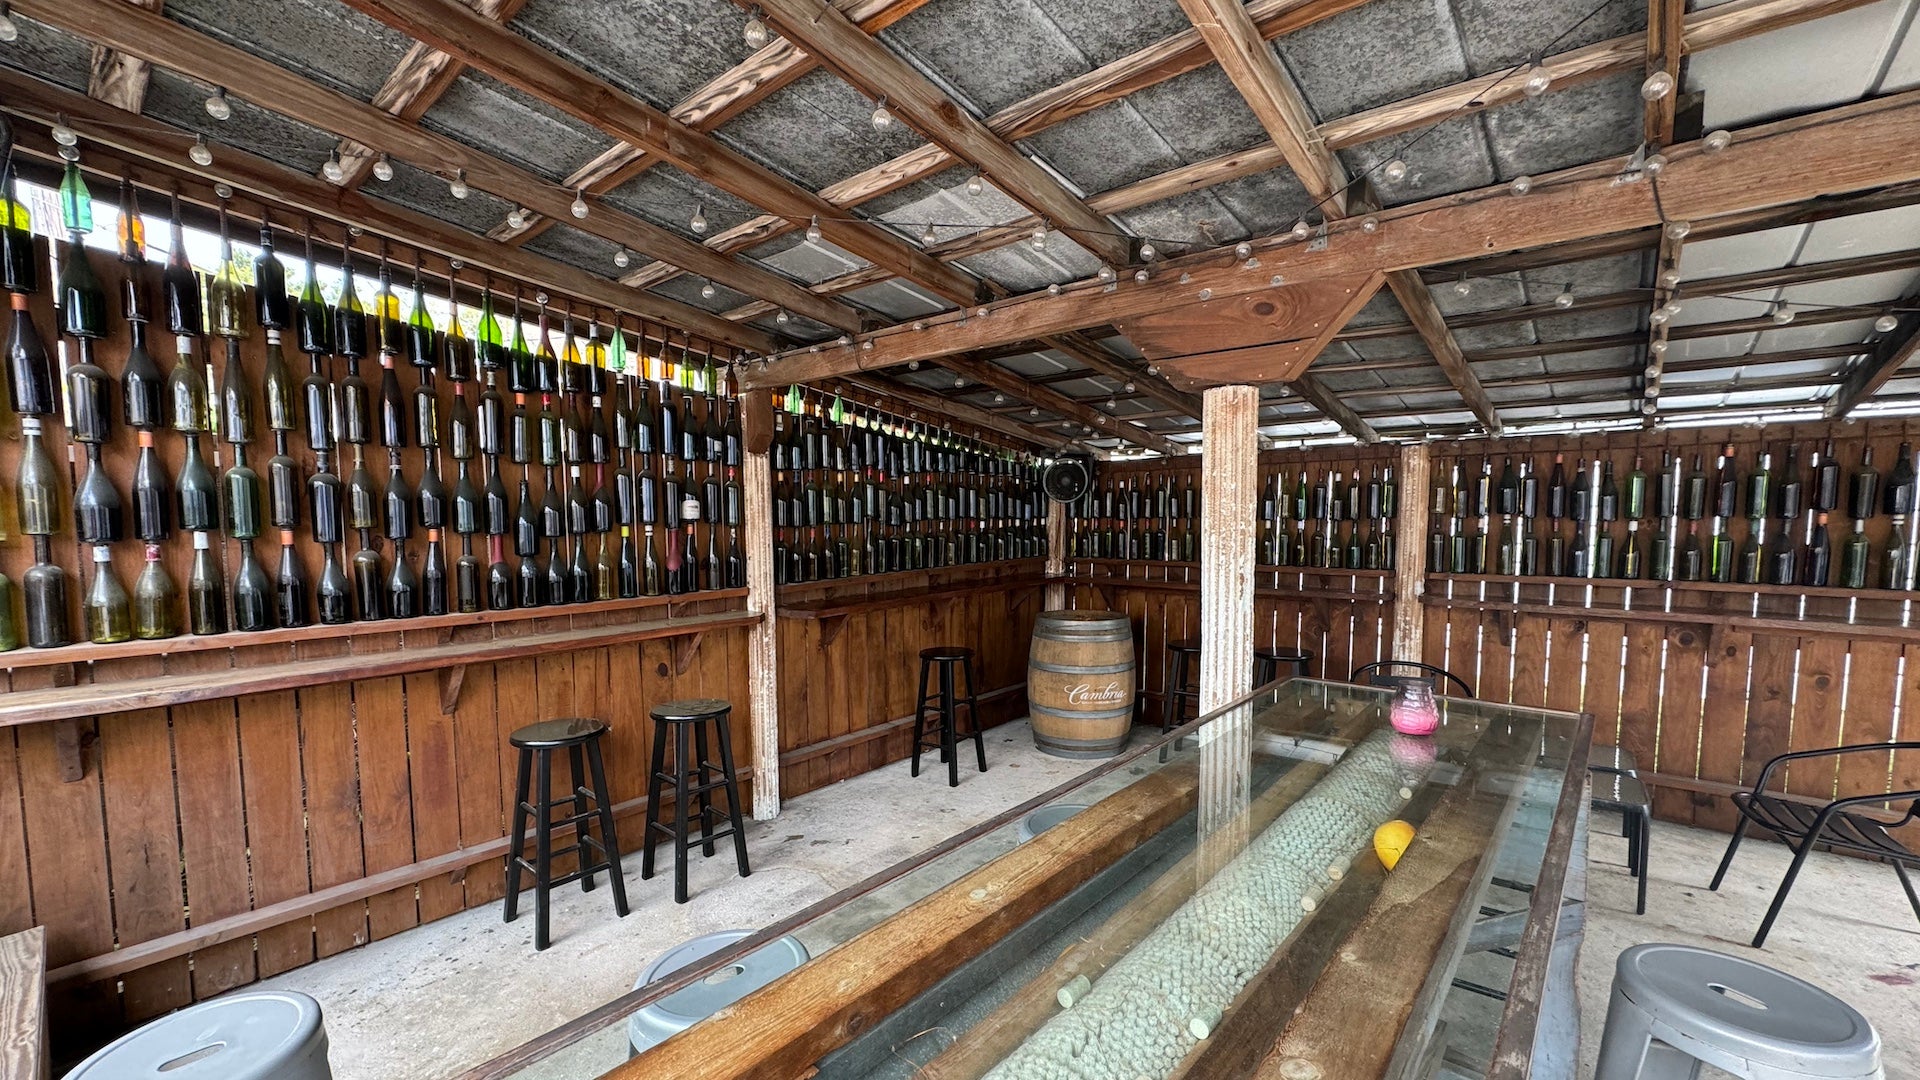 Outdoor bar area with walls covered with hanging wine bottles